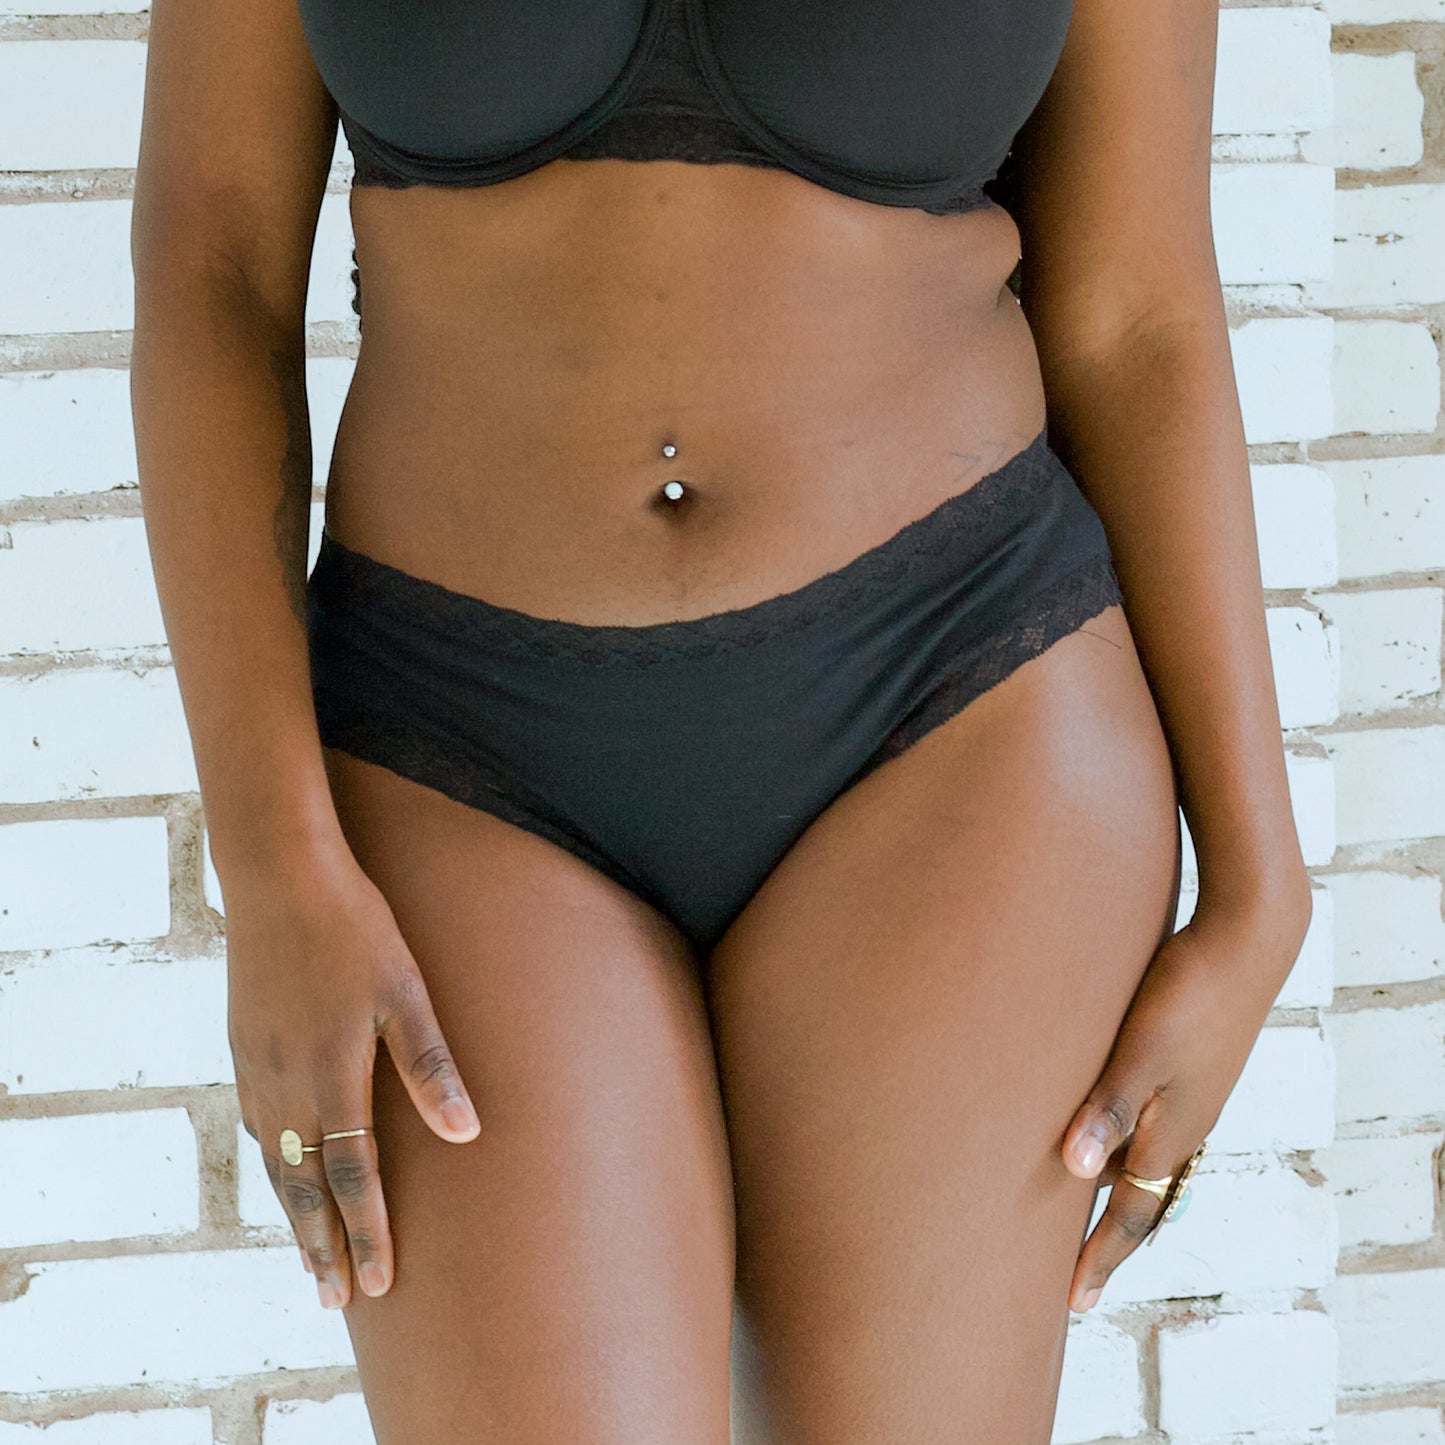 Uwila Warrior sits at the lingerie nexus of quality and comfort –  CTFashionMag